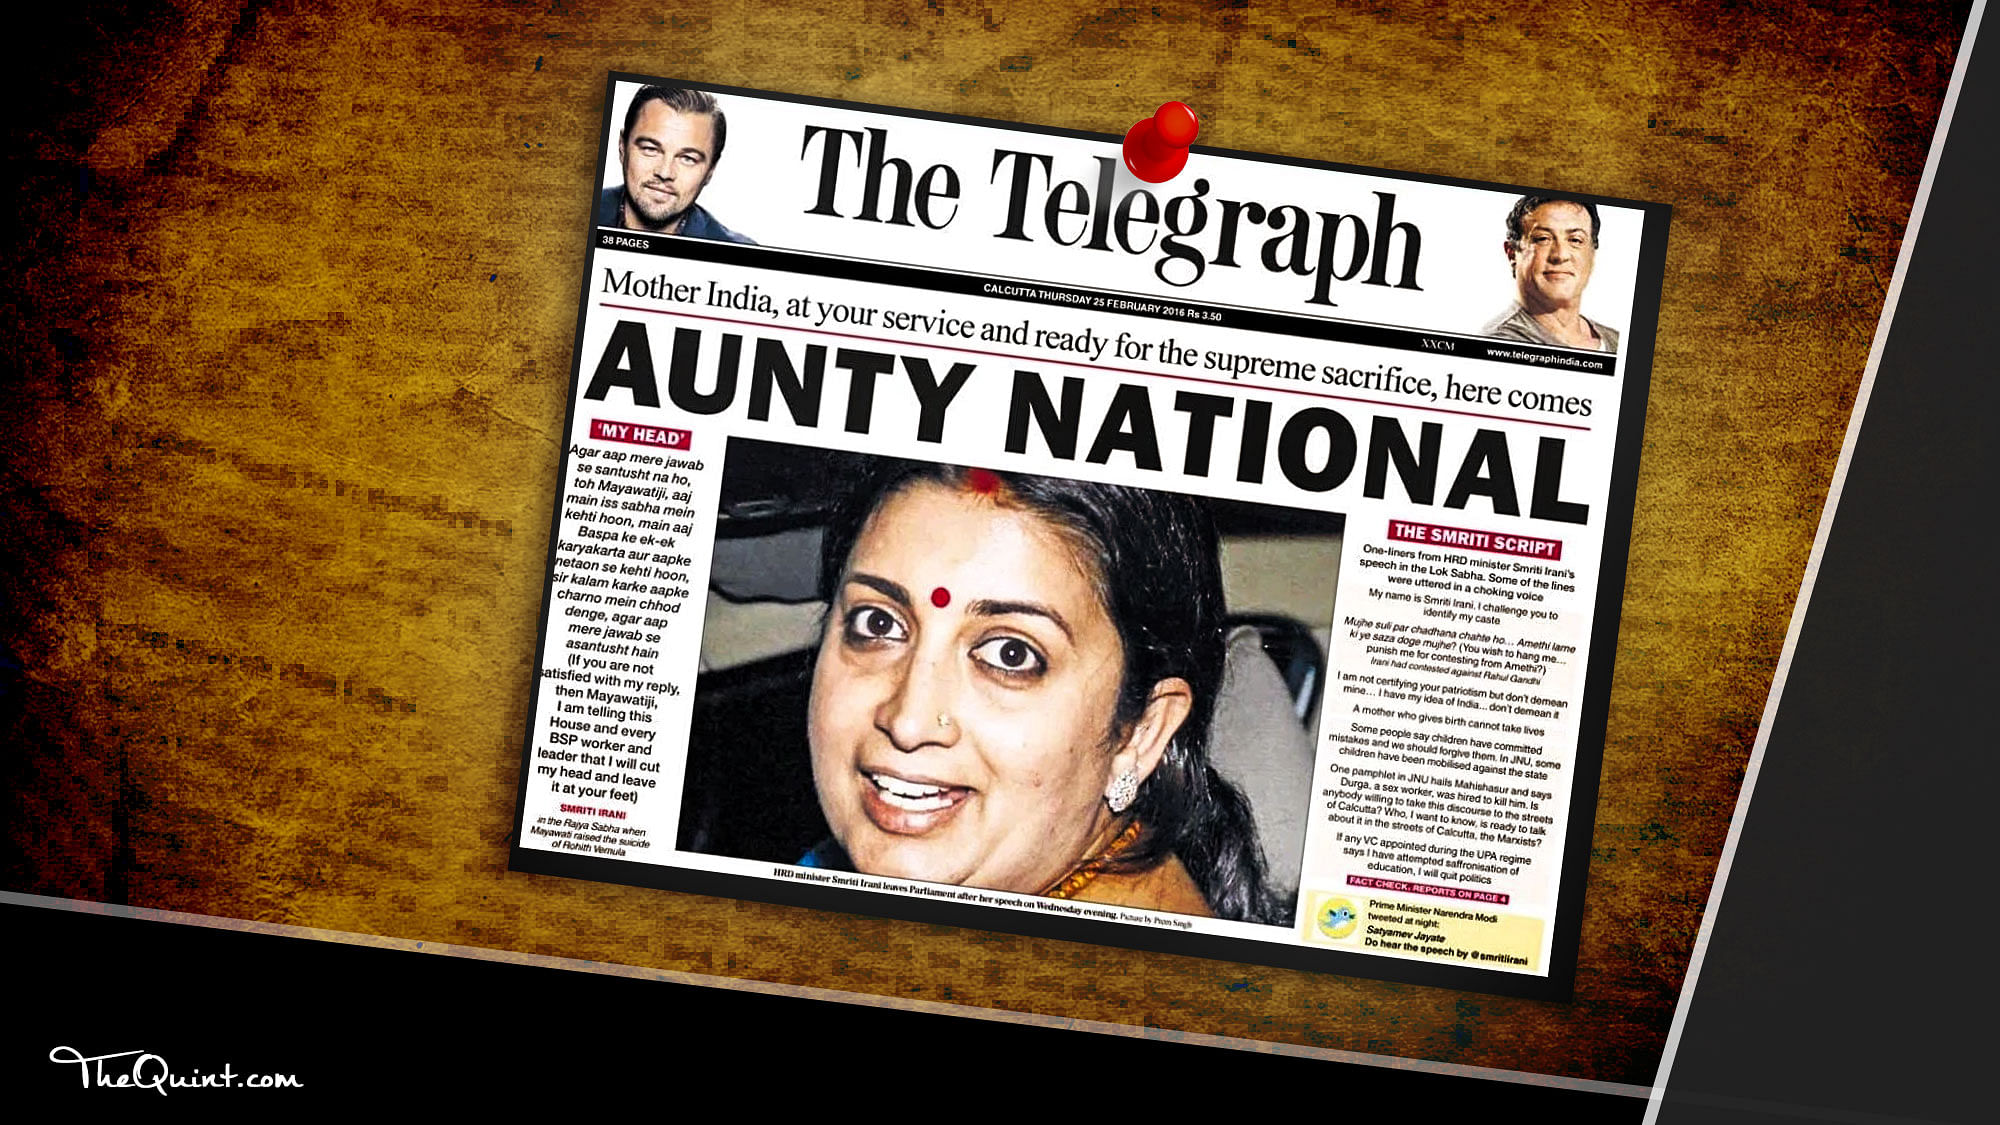 <i>The Telegraph</i>’s front page story, titled ‘Aunty National’. (Photo Courtesy: T<a href="http://www.telegraphindia.com/1160617/jsp/frontpage/story_91730.jsp#.WFPLdFN96Uk">he Telegraph</a>)